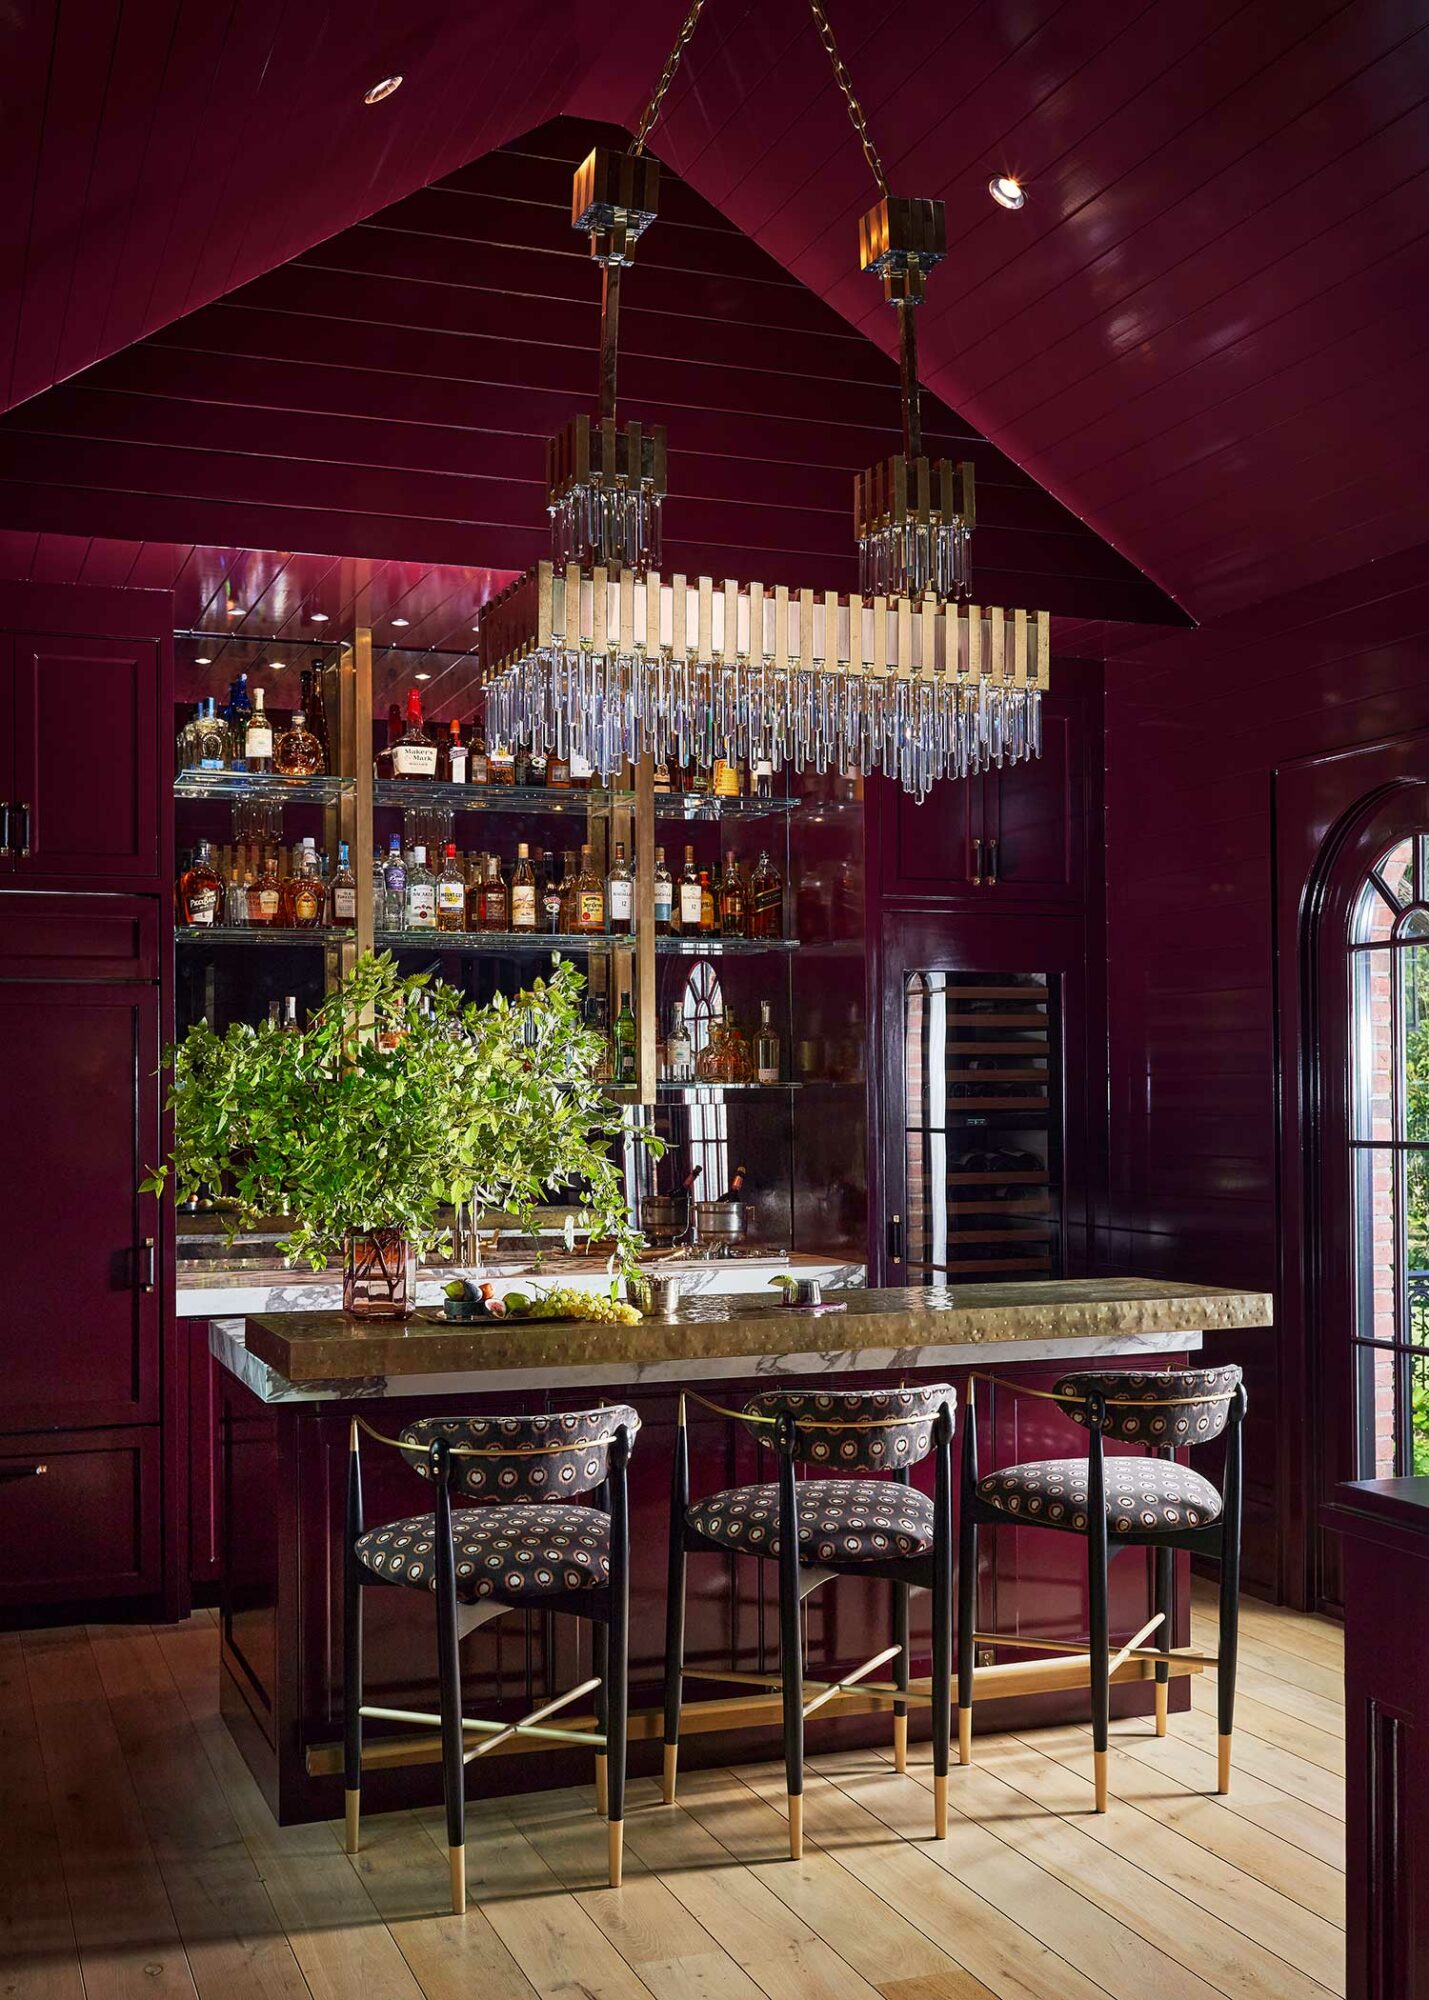 bar area painted glossy maroon with crystal chandelier hanging from peaked ceiling and three counter stools